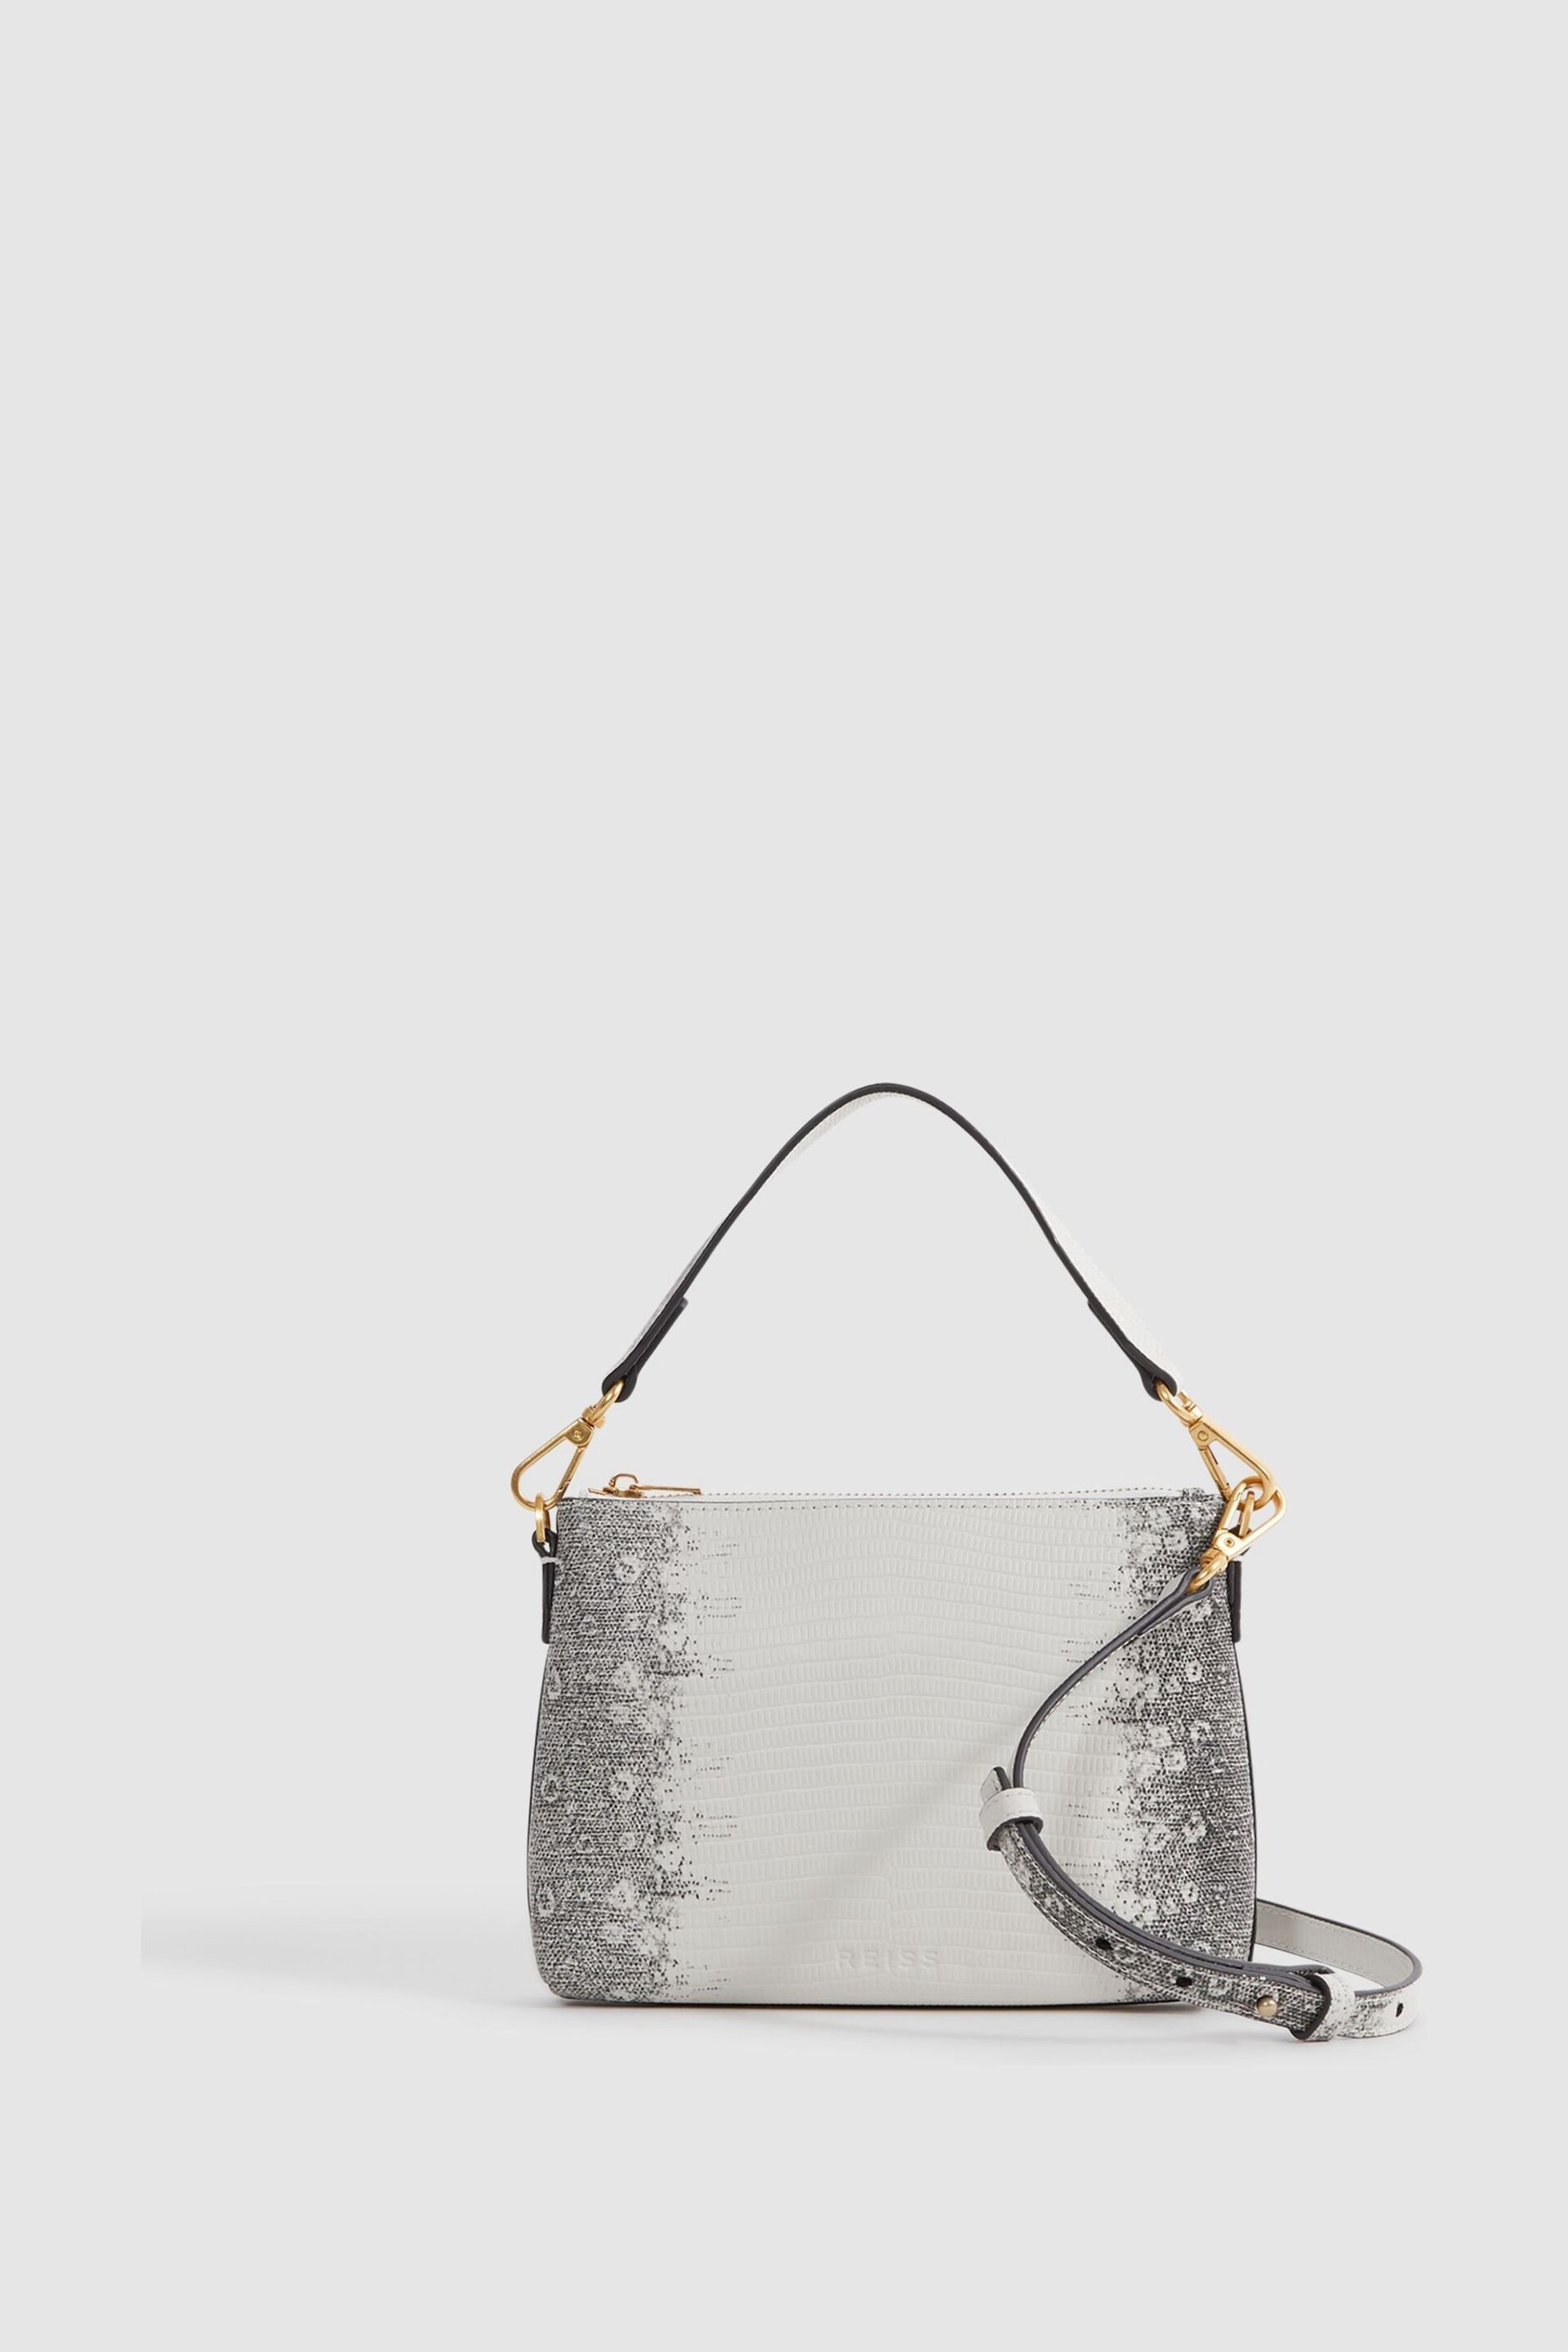 Reiss Grey/White Brompton Leather Double Strap Pouch Bag - Image 1 of 5